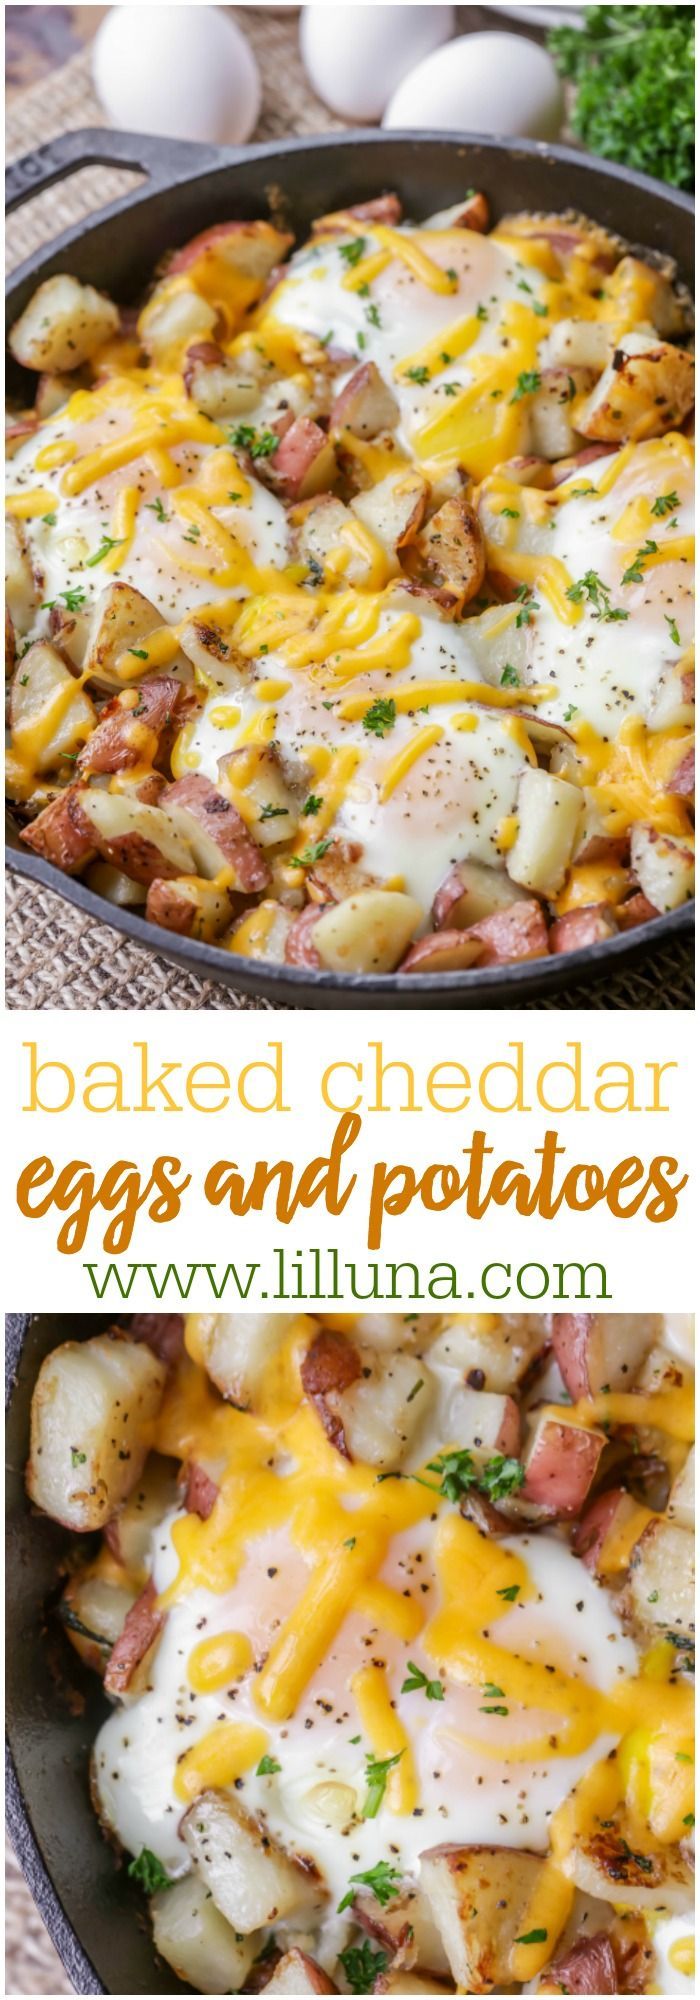 Baked Cheddar Eggs and Potatoes – the best way to make breakfast! It’s full of flavor, cheese and all your favorite breakfast